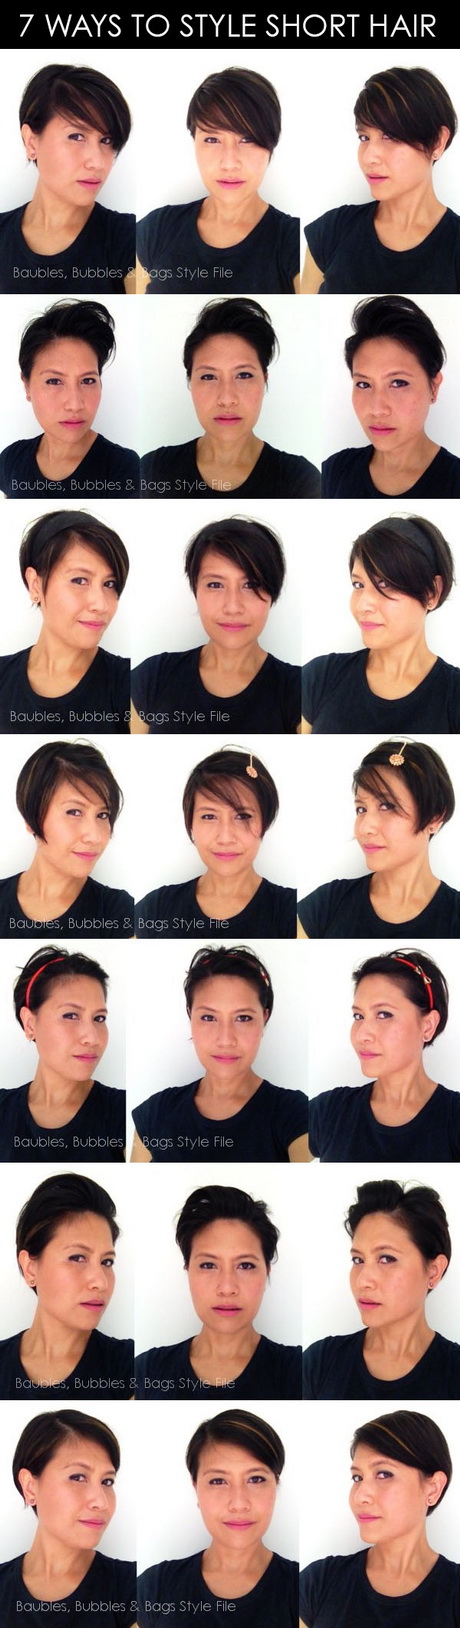 Styles to do with short hair styles-to-do-with-short-hair-40_5